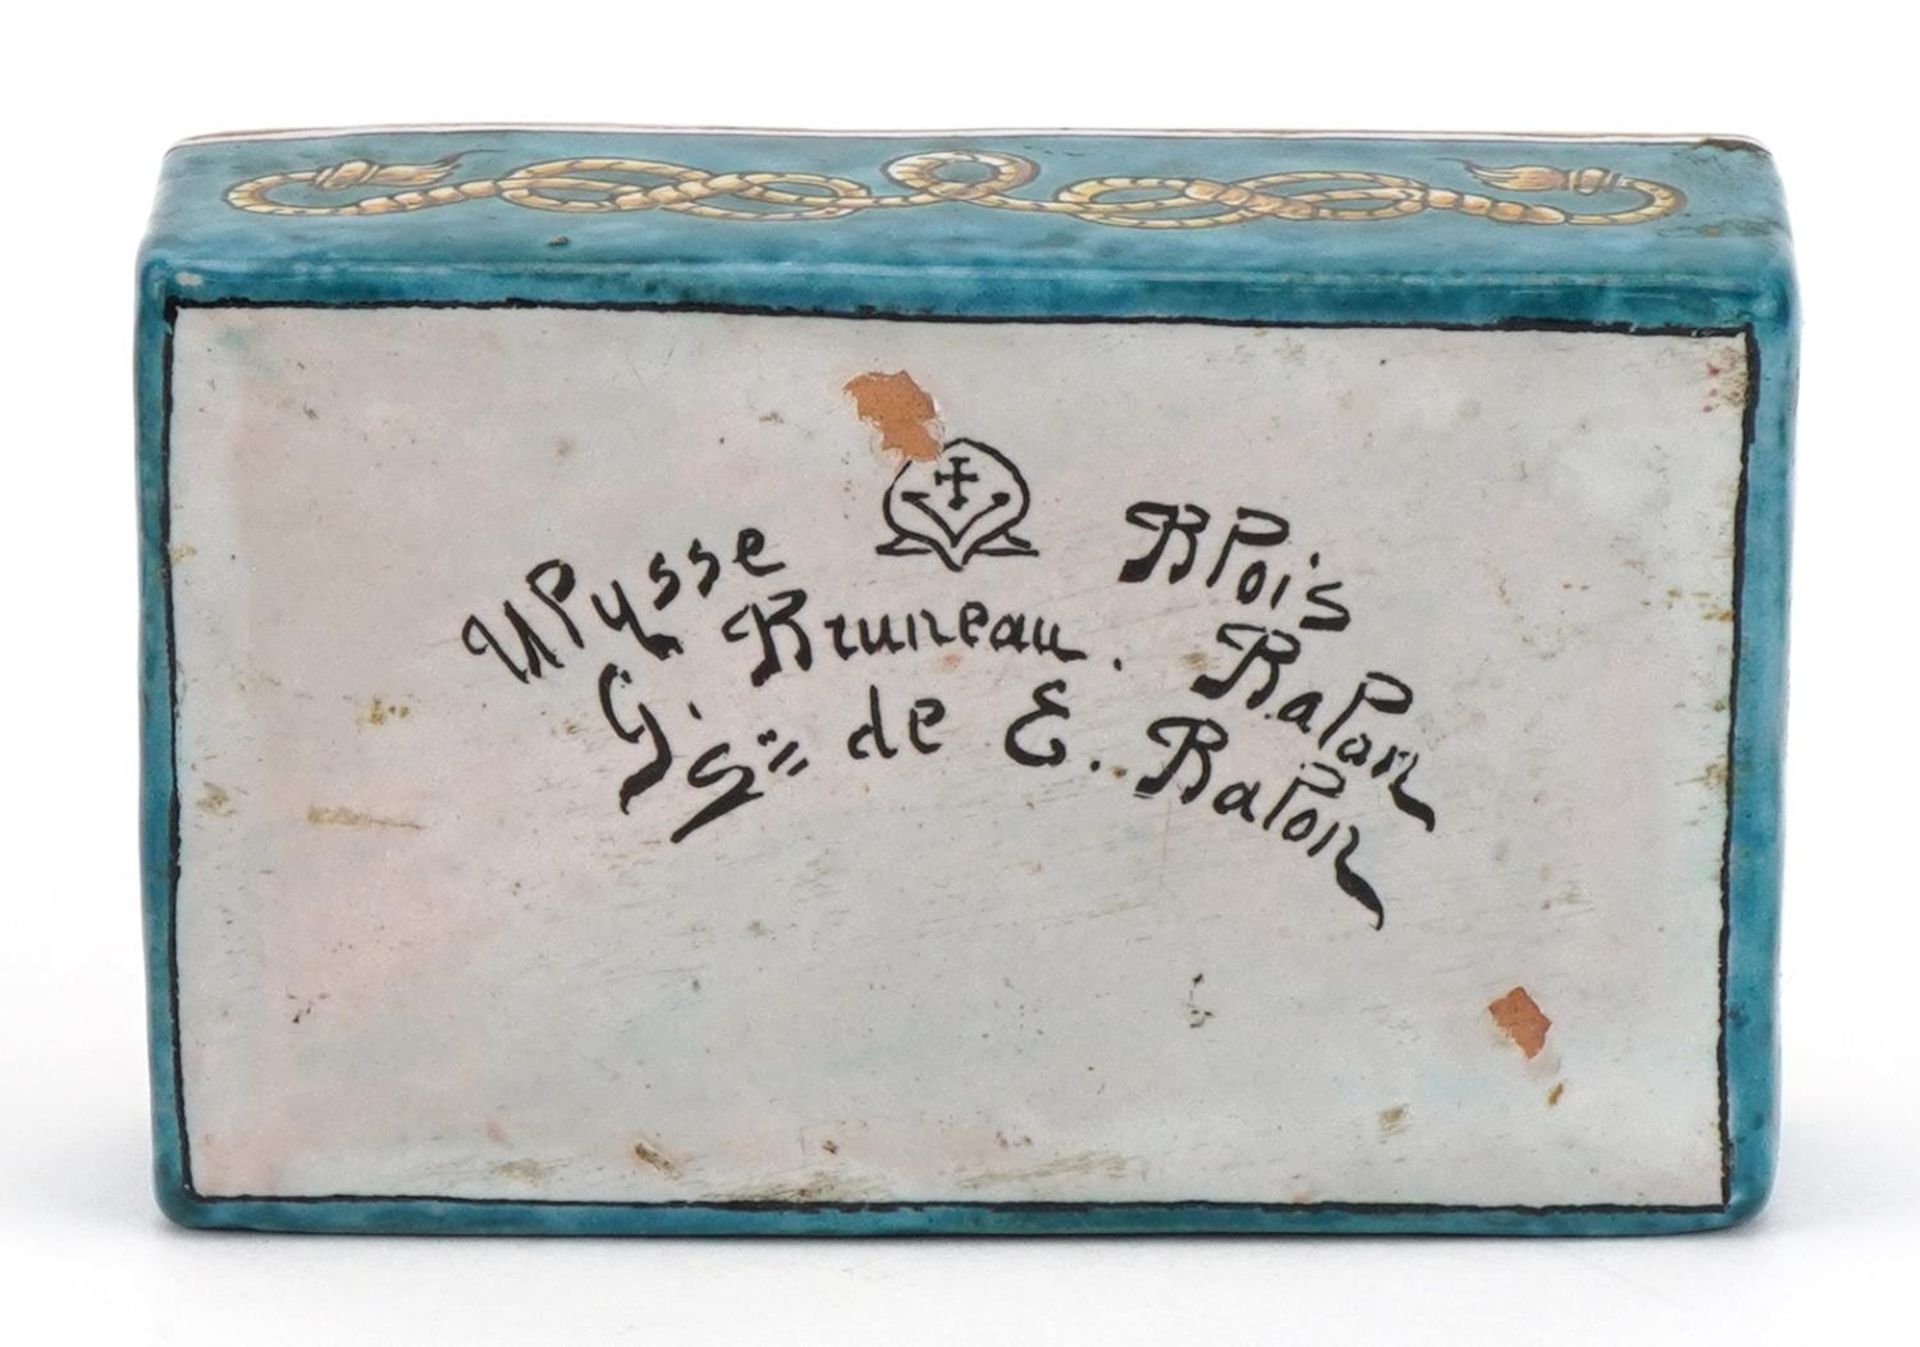 Ulysse Blois, 19th century French faience glazed pottery box and cover hand painted with fleur de - Image 8 of 8